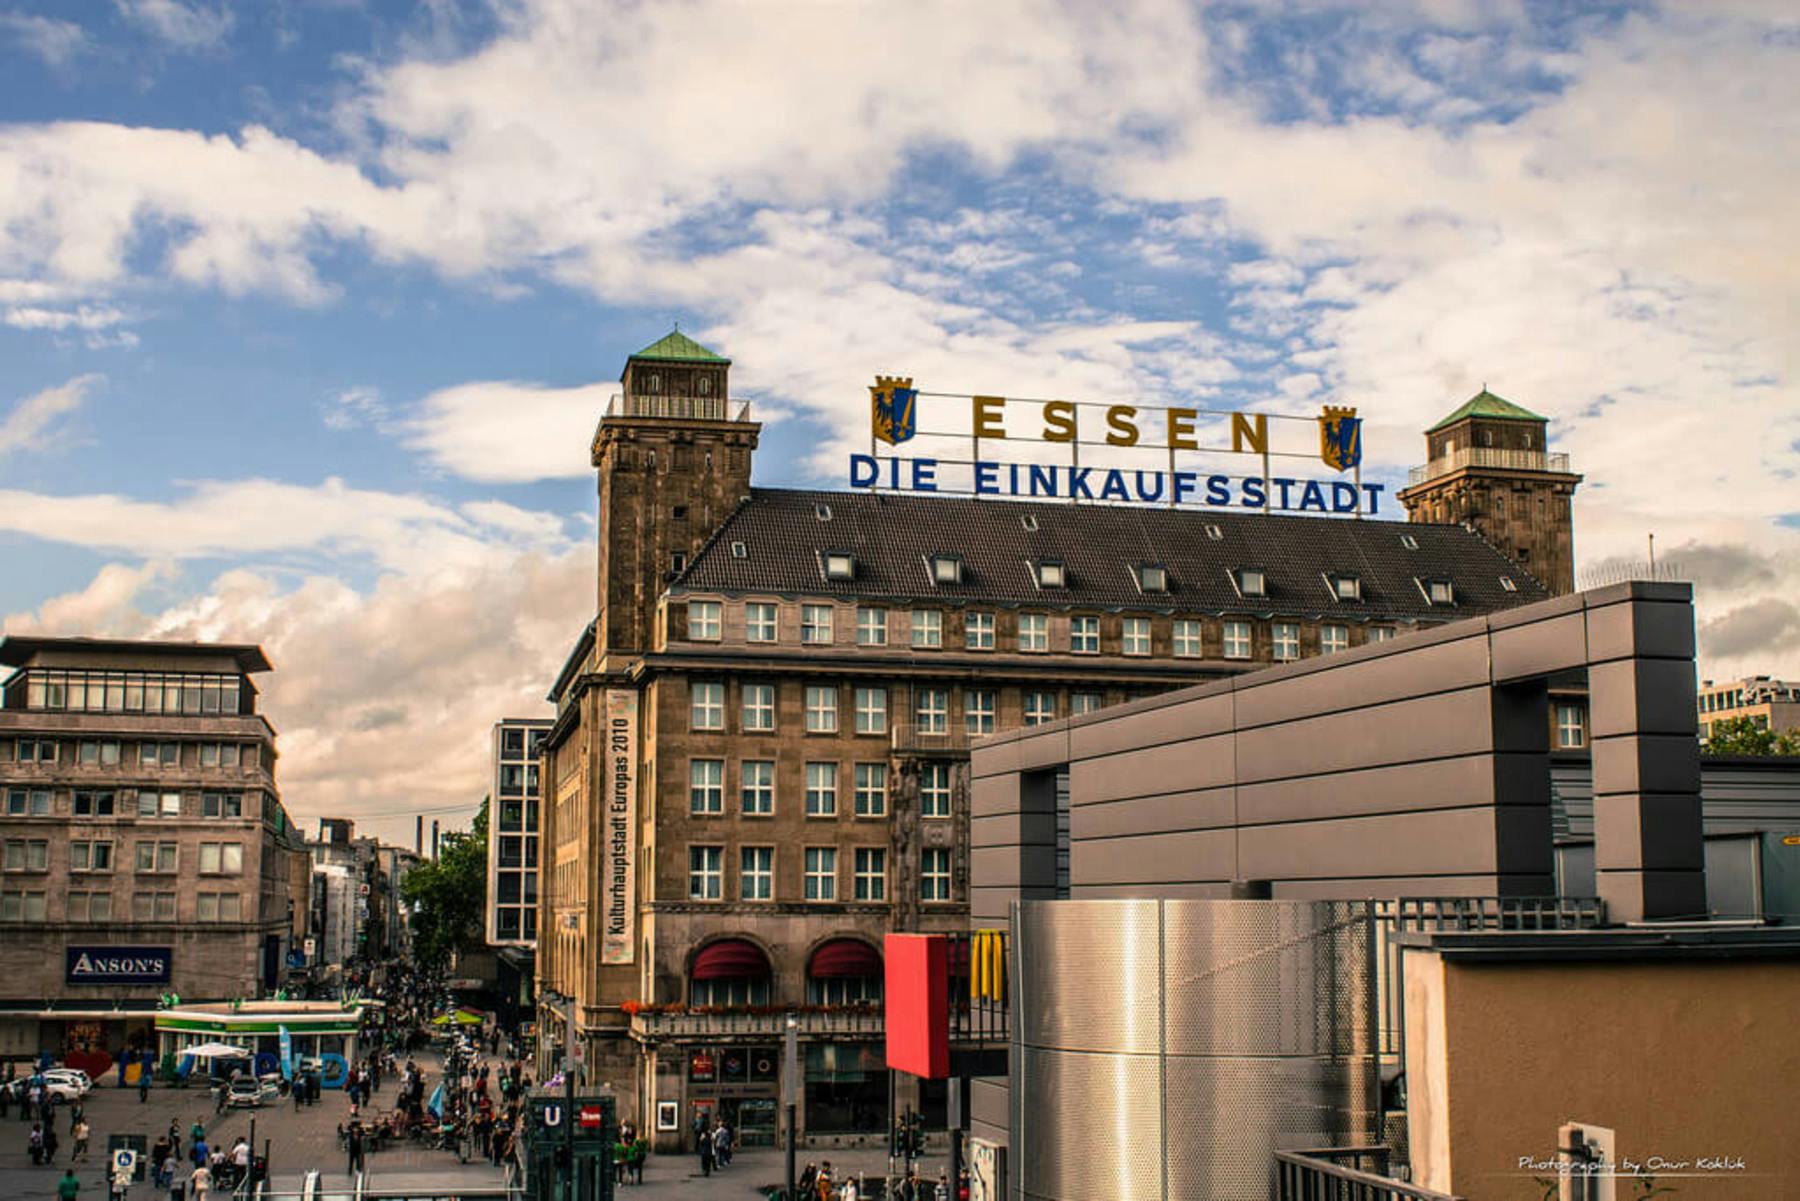 Moving and living in Essen near to Central Station